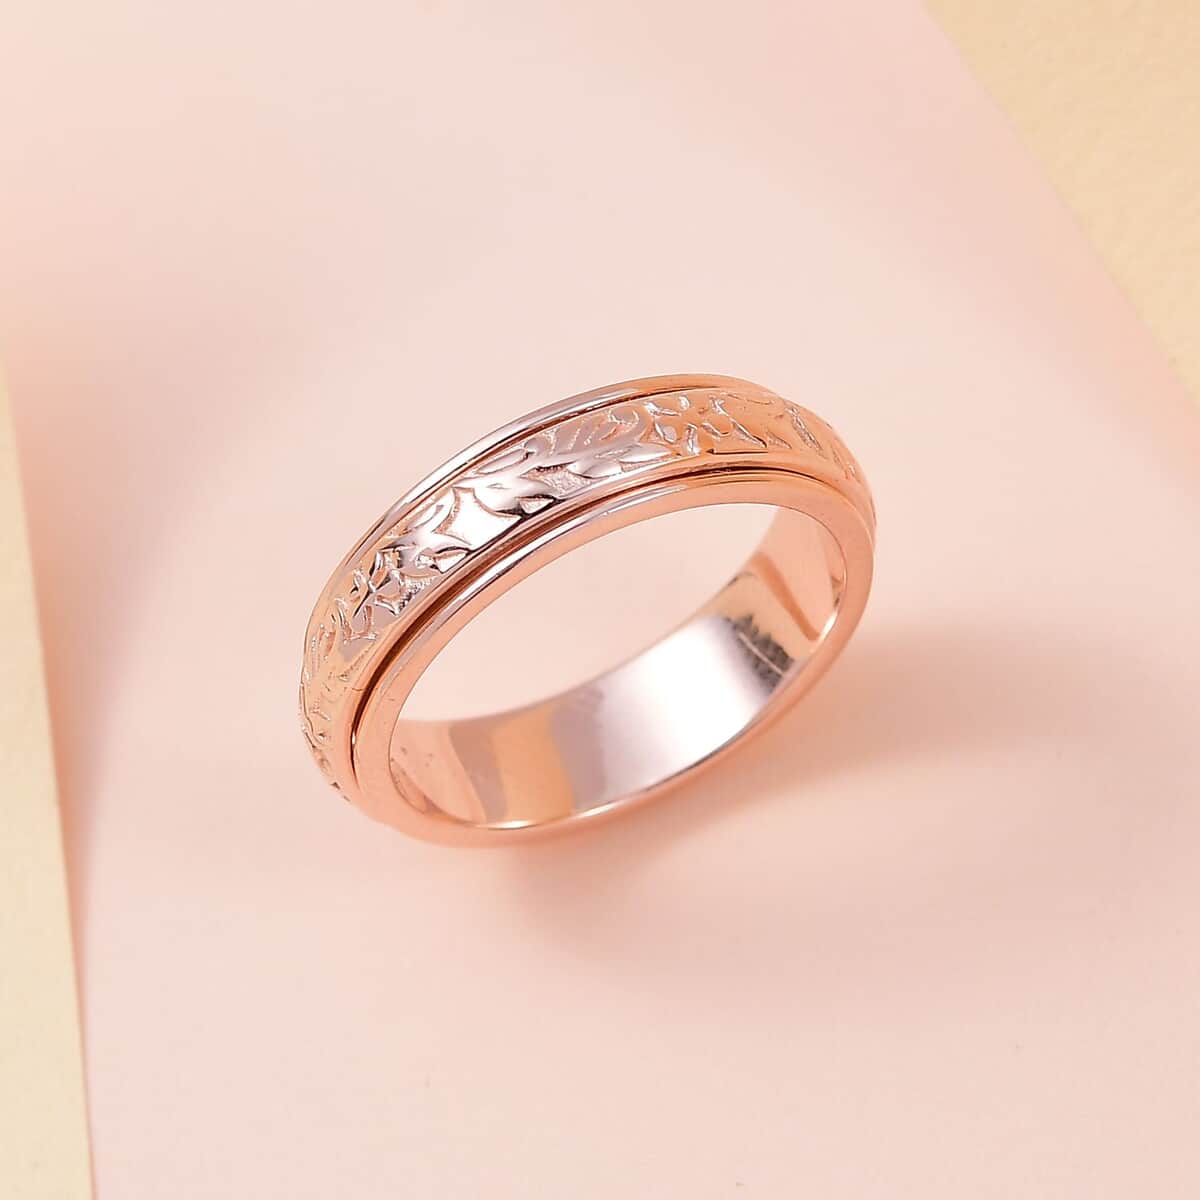 Floral Fidget Spinner Ring for Anxiety in Vermeil Rose Gold Over Sterling Silver, Anxiety Ring for Women, Fidget Rings for Anxiety, Promise Rings 4.50 Grams (Size 5.00) image number 1